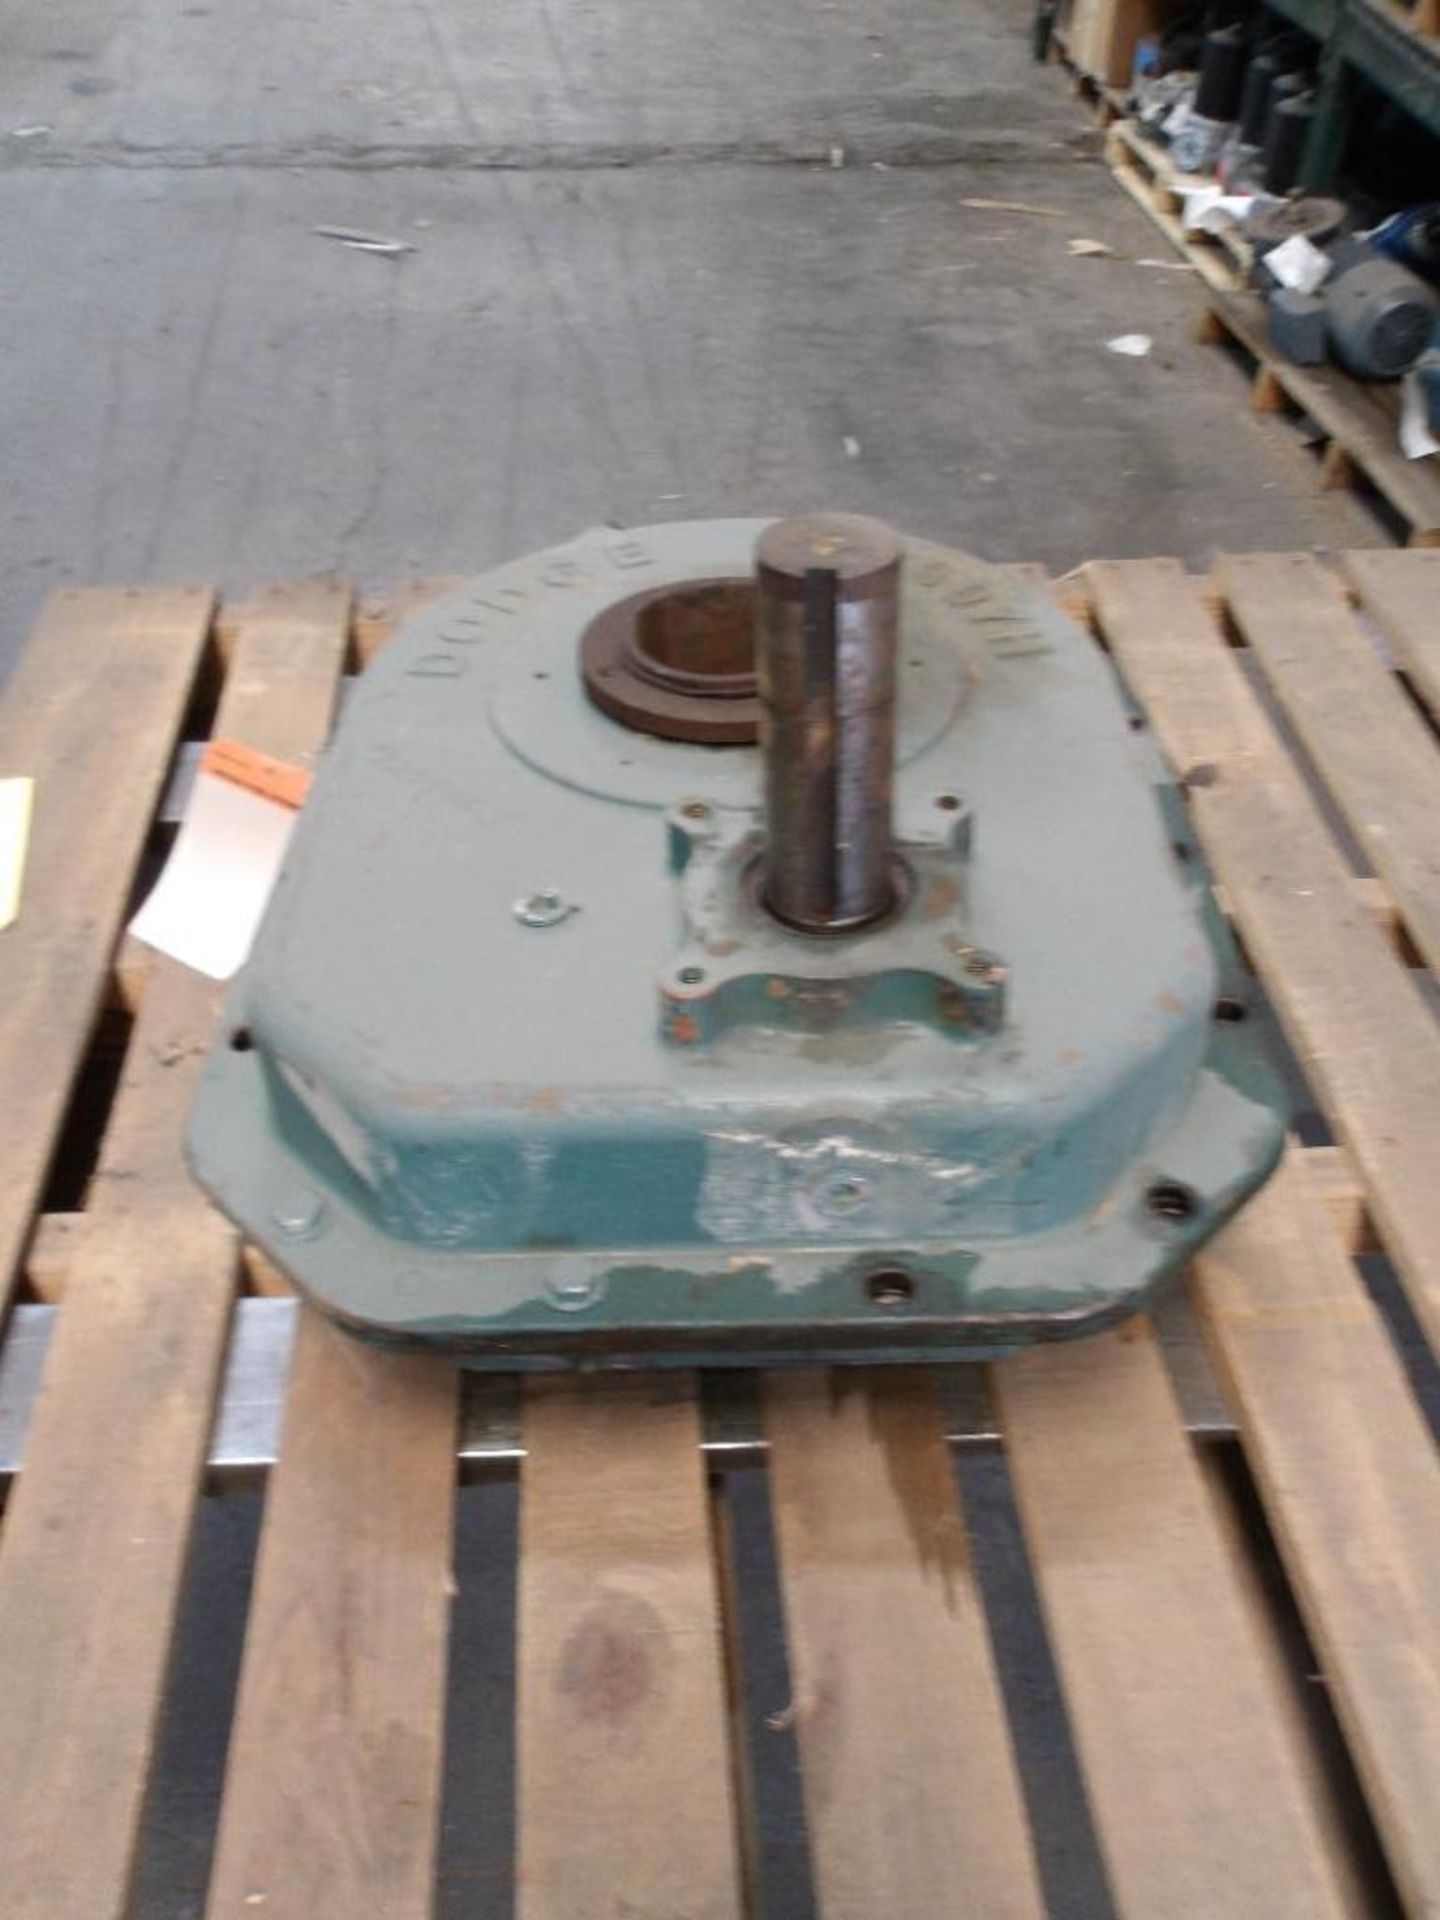 Dodge Shaft Mounted Gearbox, Model TA 6307 H (Used) - Image 4 of 4